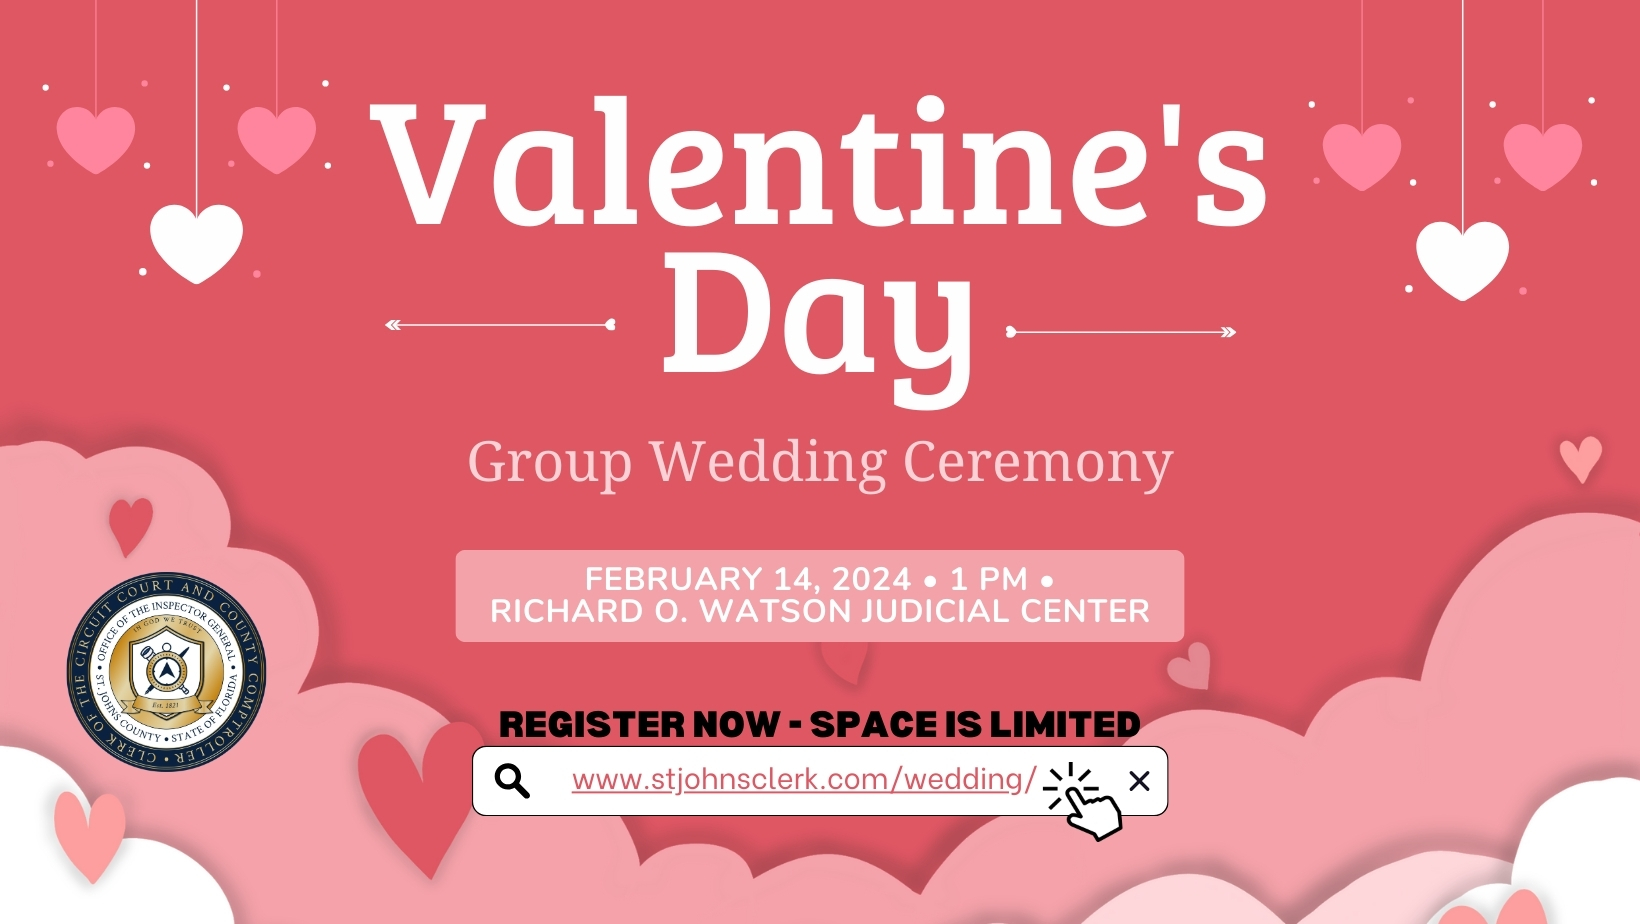 St. Johns County Clerk of Court to Host Valentine’s Day Group Wedding Ceremony